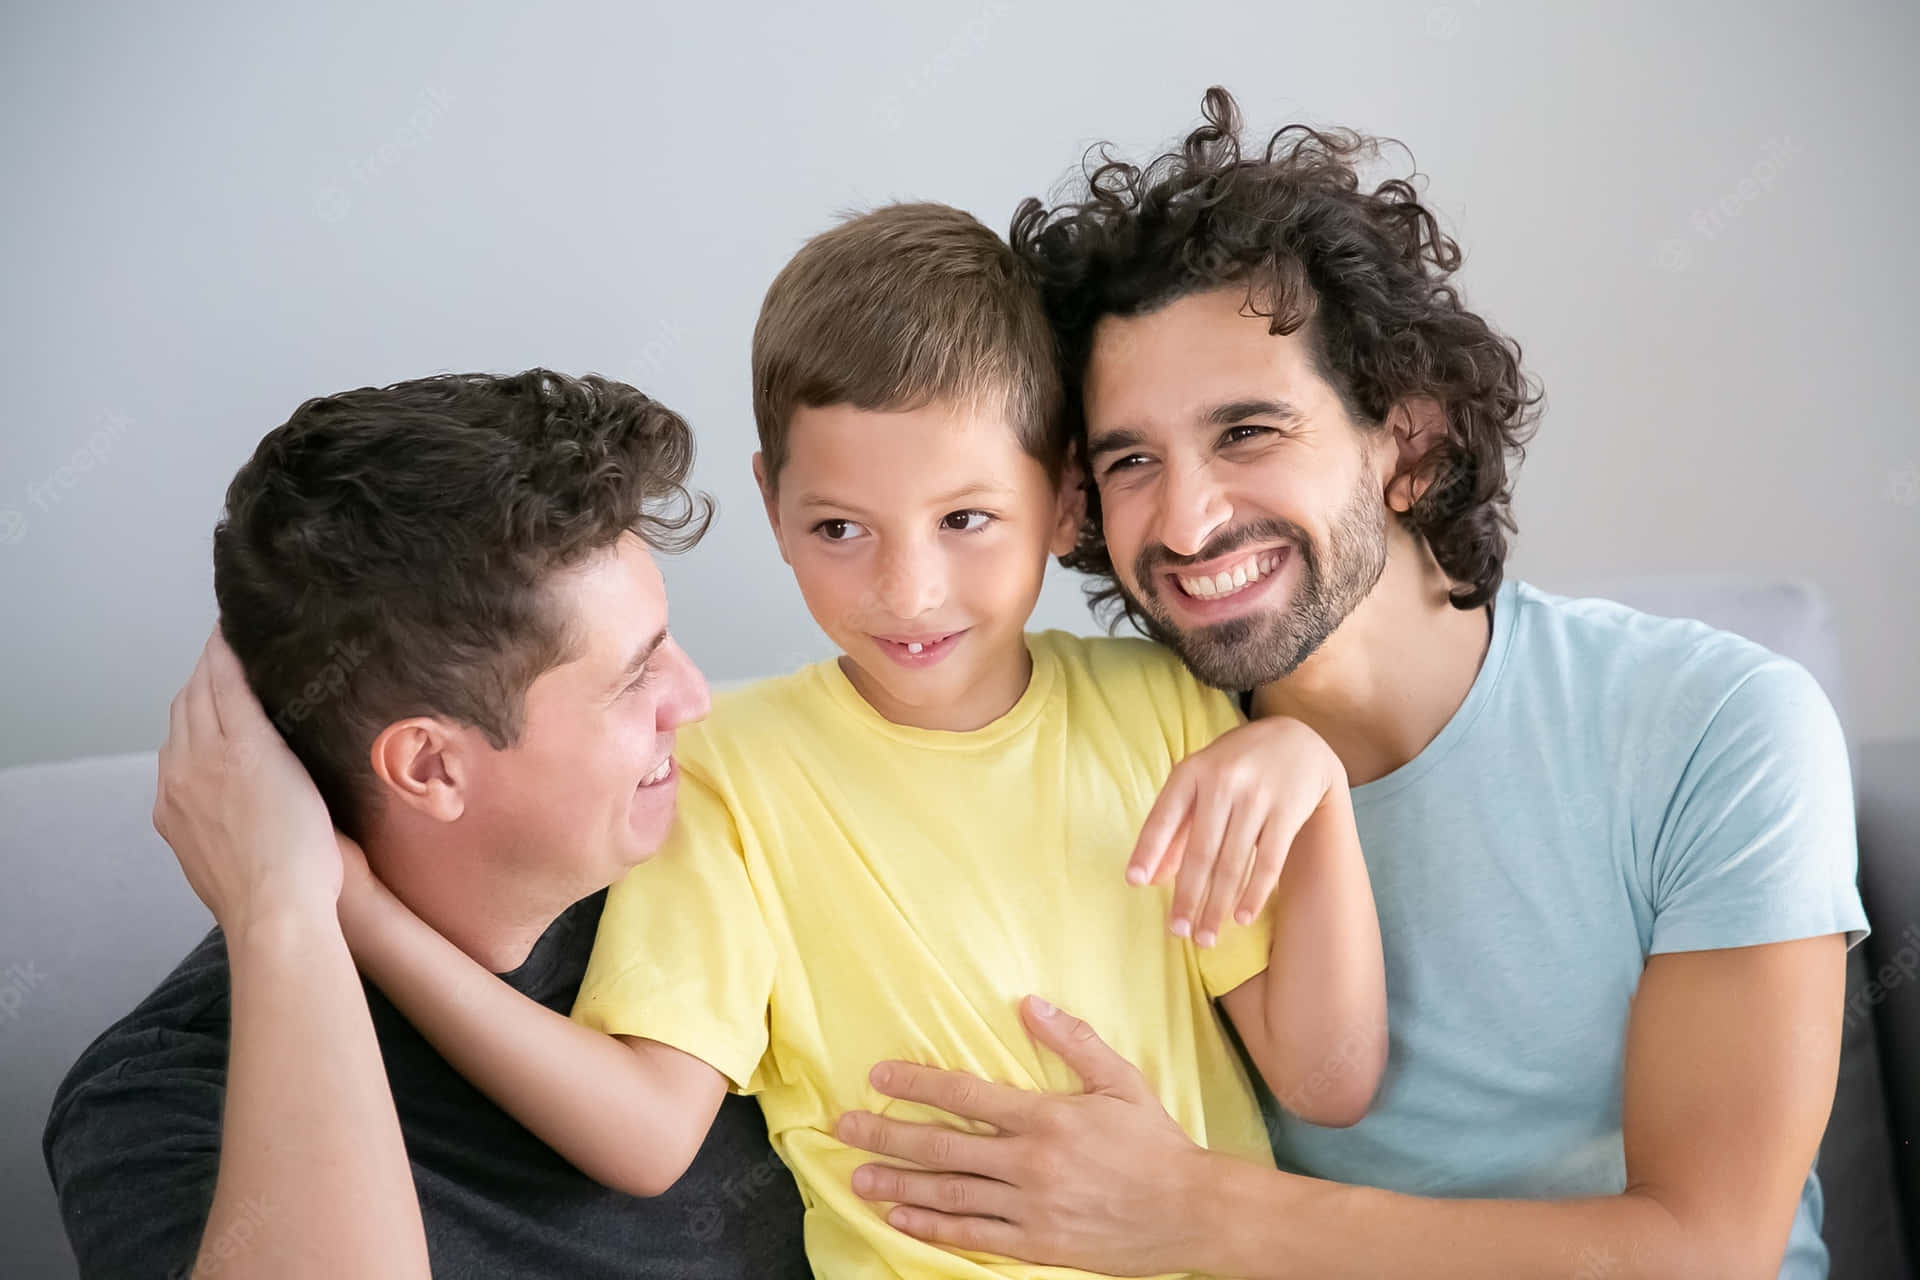 Smiling Gay Boys With A Kid Background